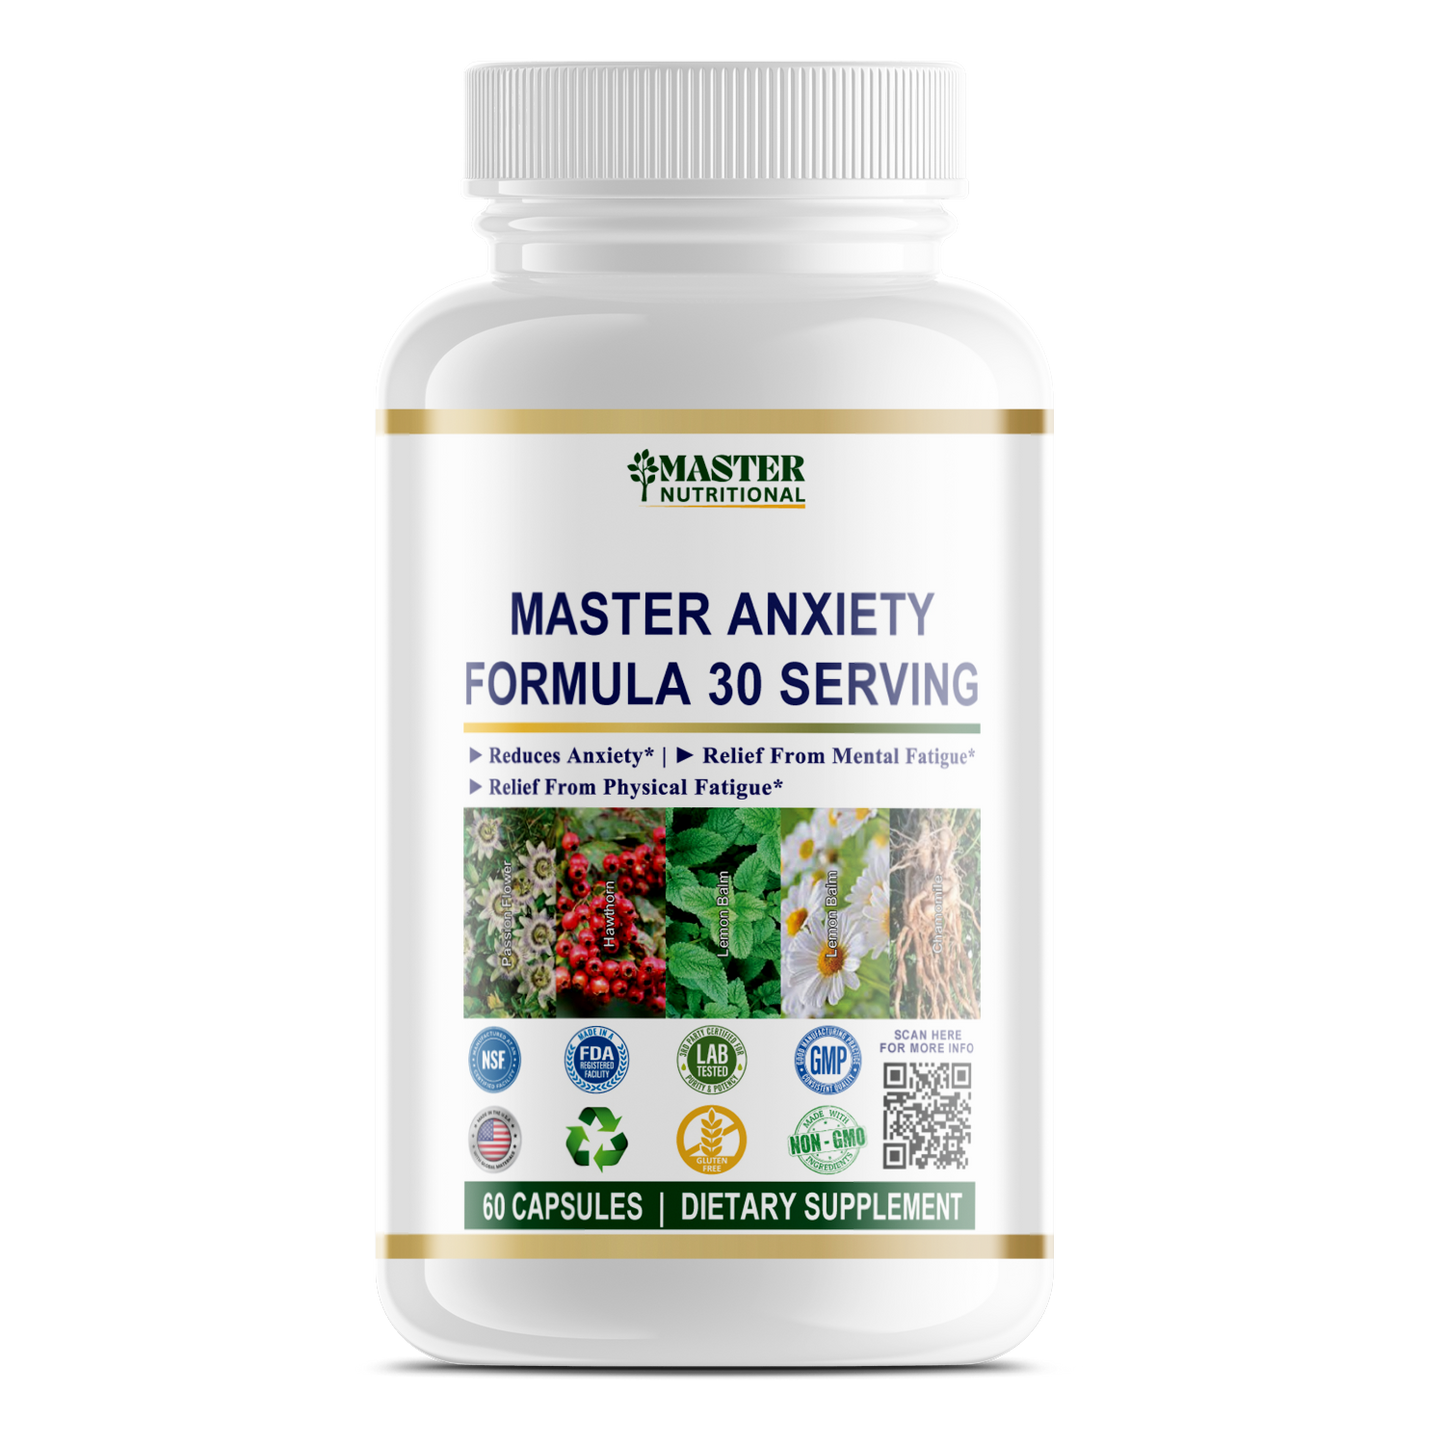 Master Anxiety Formula – Your Key to Calmness and Wellness